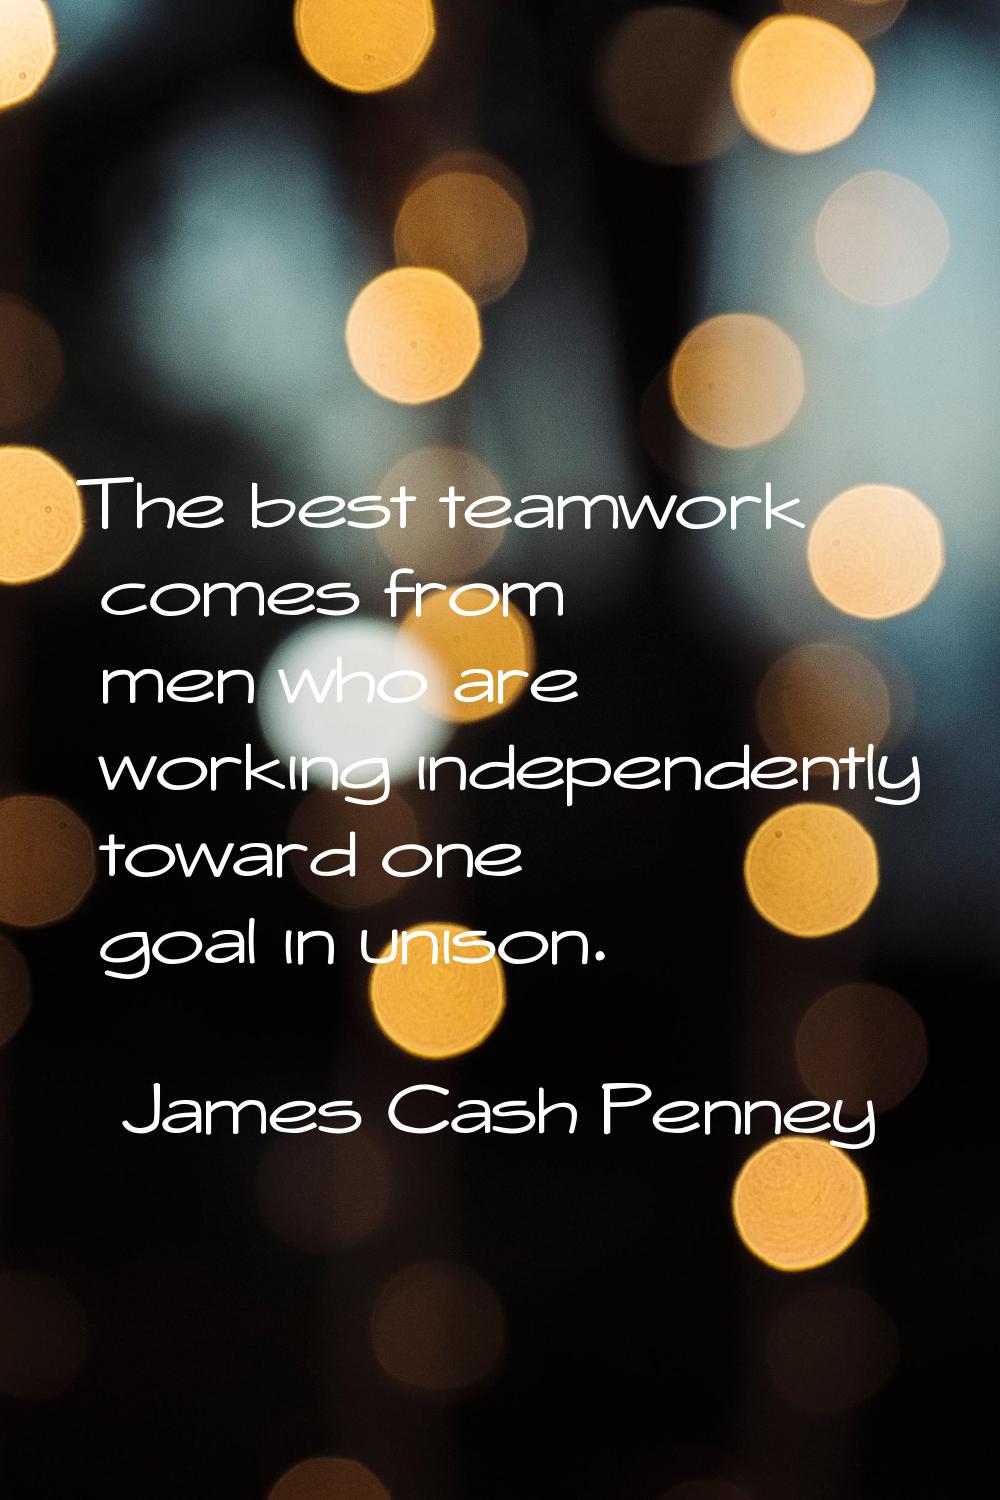 The best teamwork comes from men who are working independently toward one goal in unison.